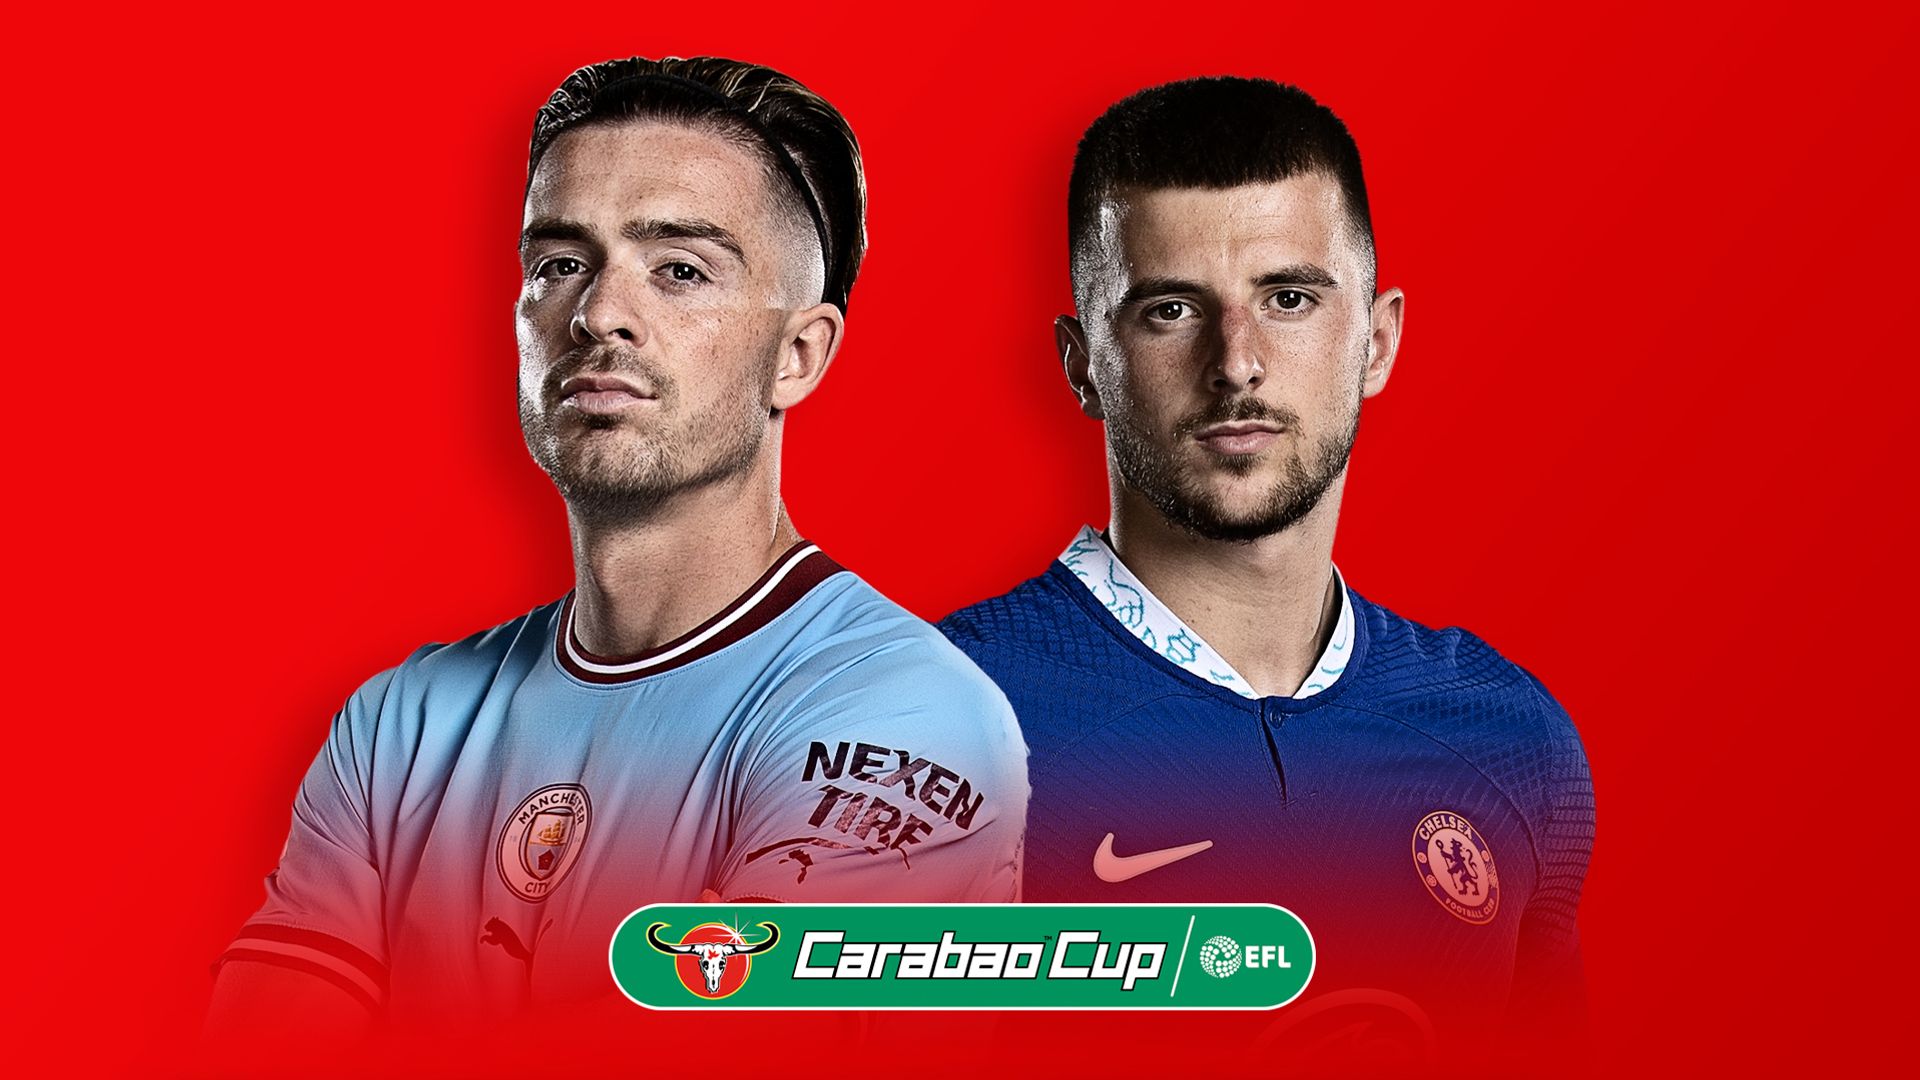 Carabao Cup third round preview: Man City vs Chelsea live on Sky